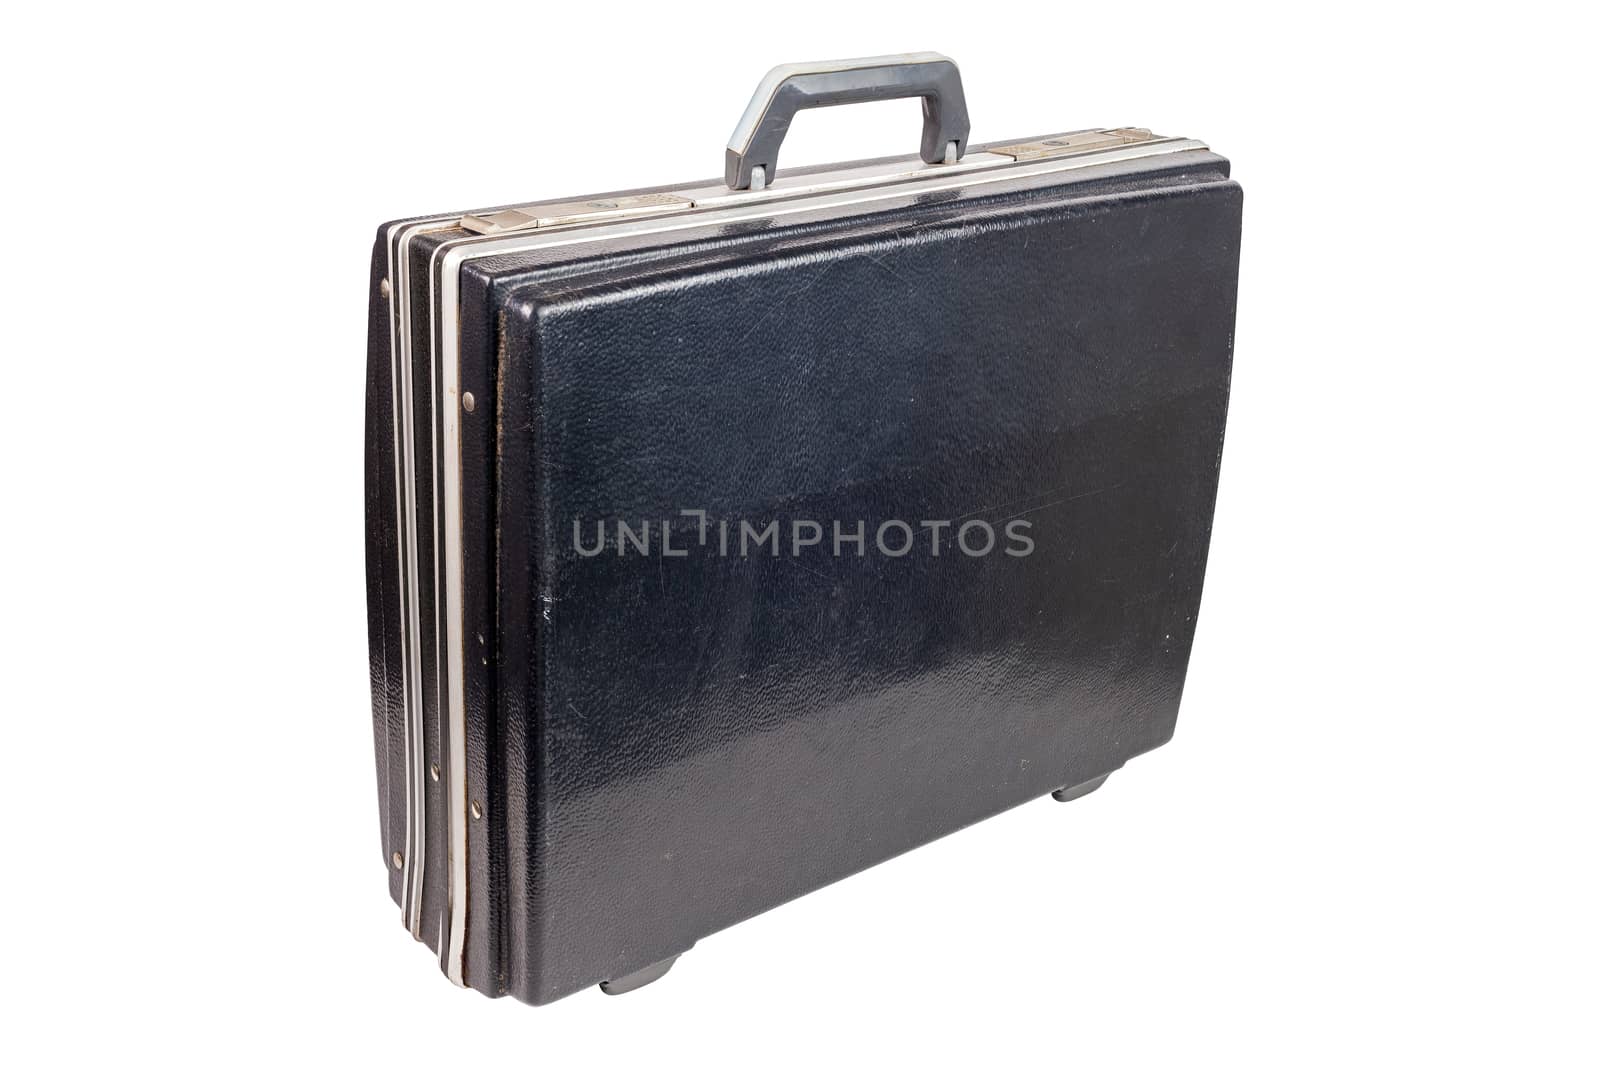 used and dirty old fashion black plastic suitcase or briefcase isolated on white background - closed and standing up